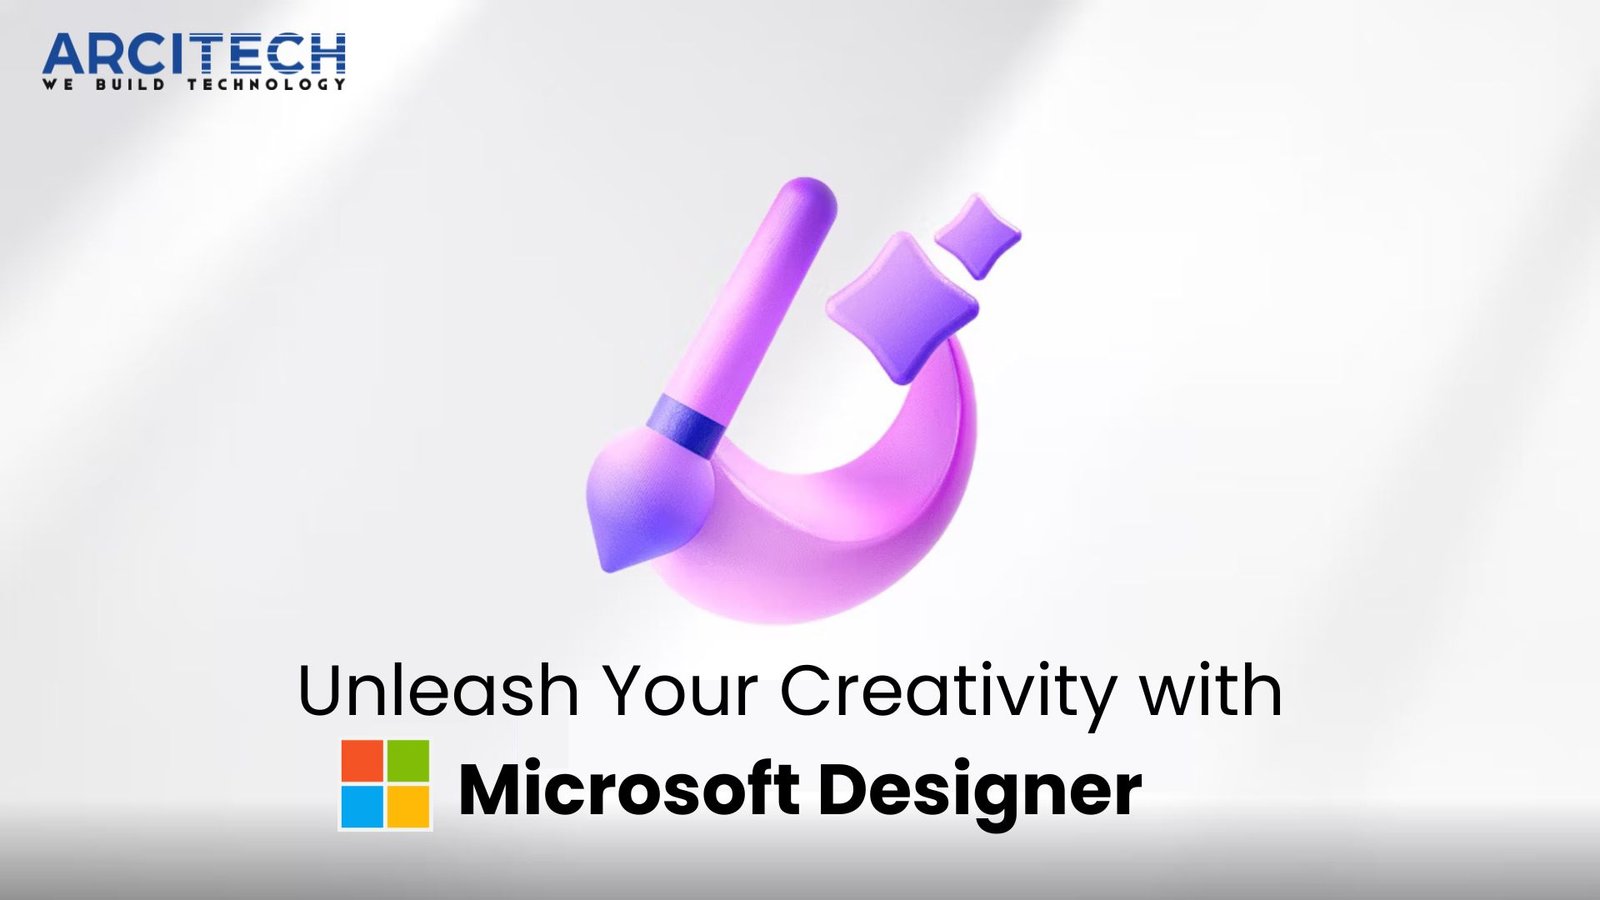 Article of Microsoft Designer by arcitech.ai